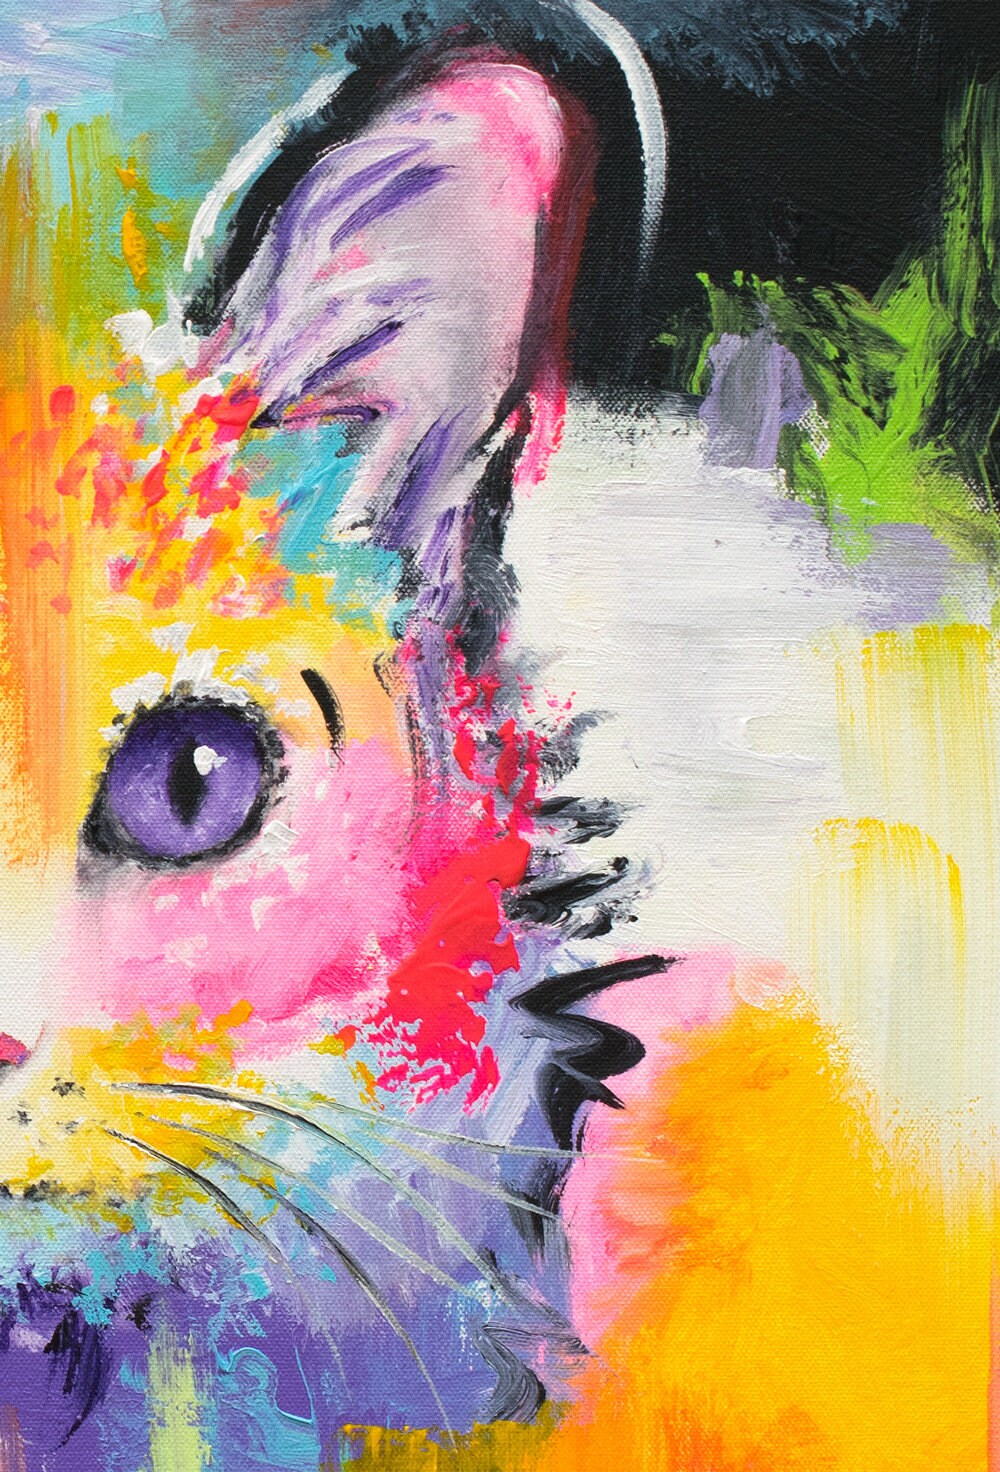 Meow Cat Painting - 24x24"